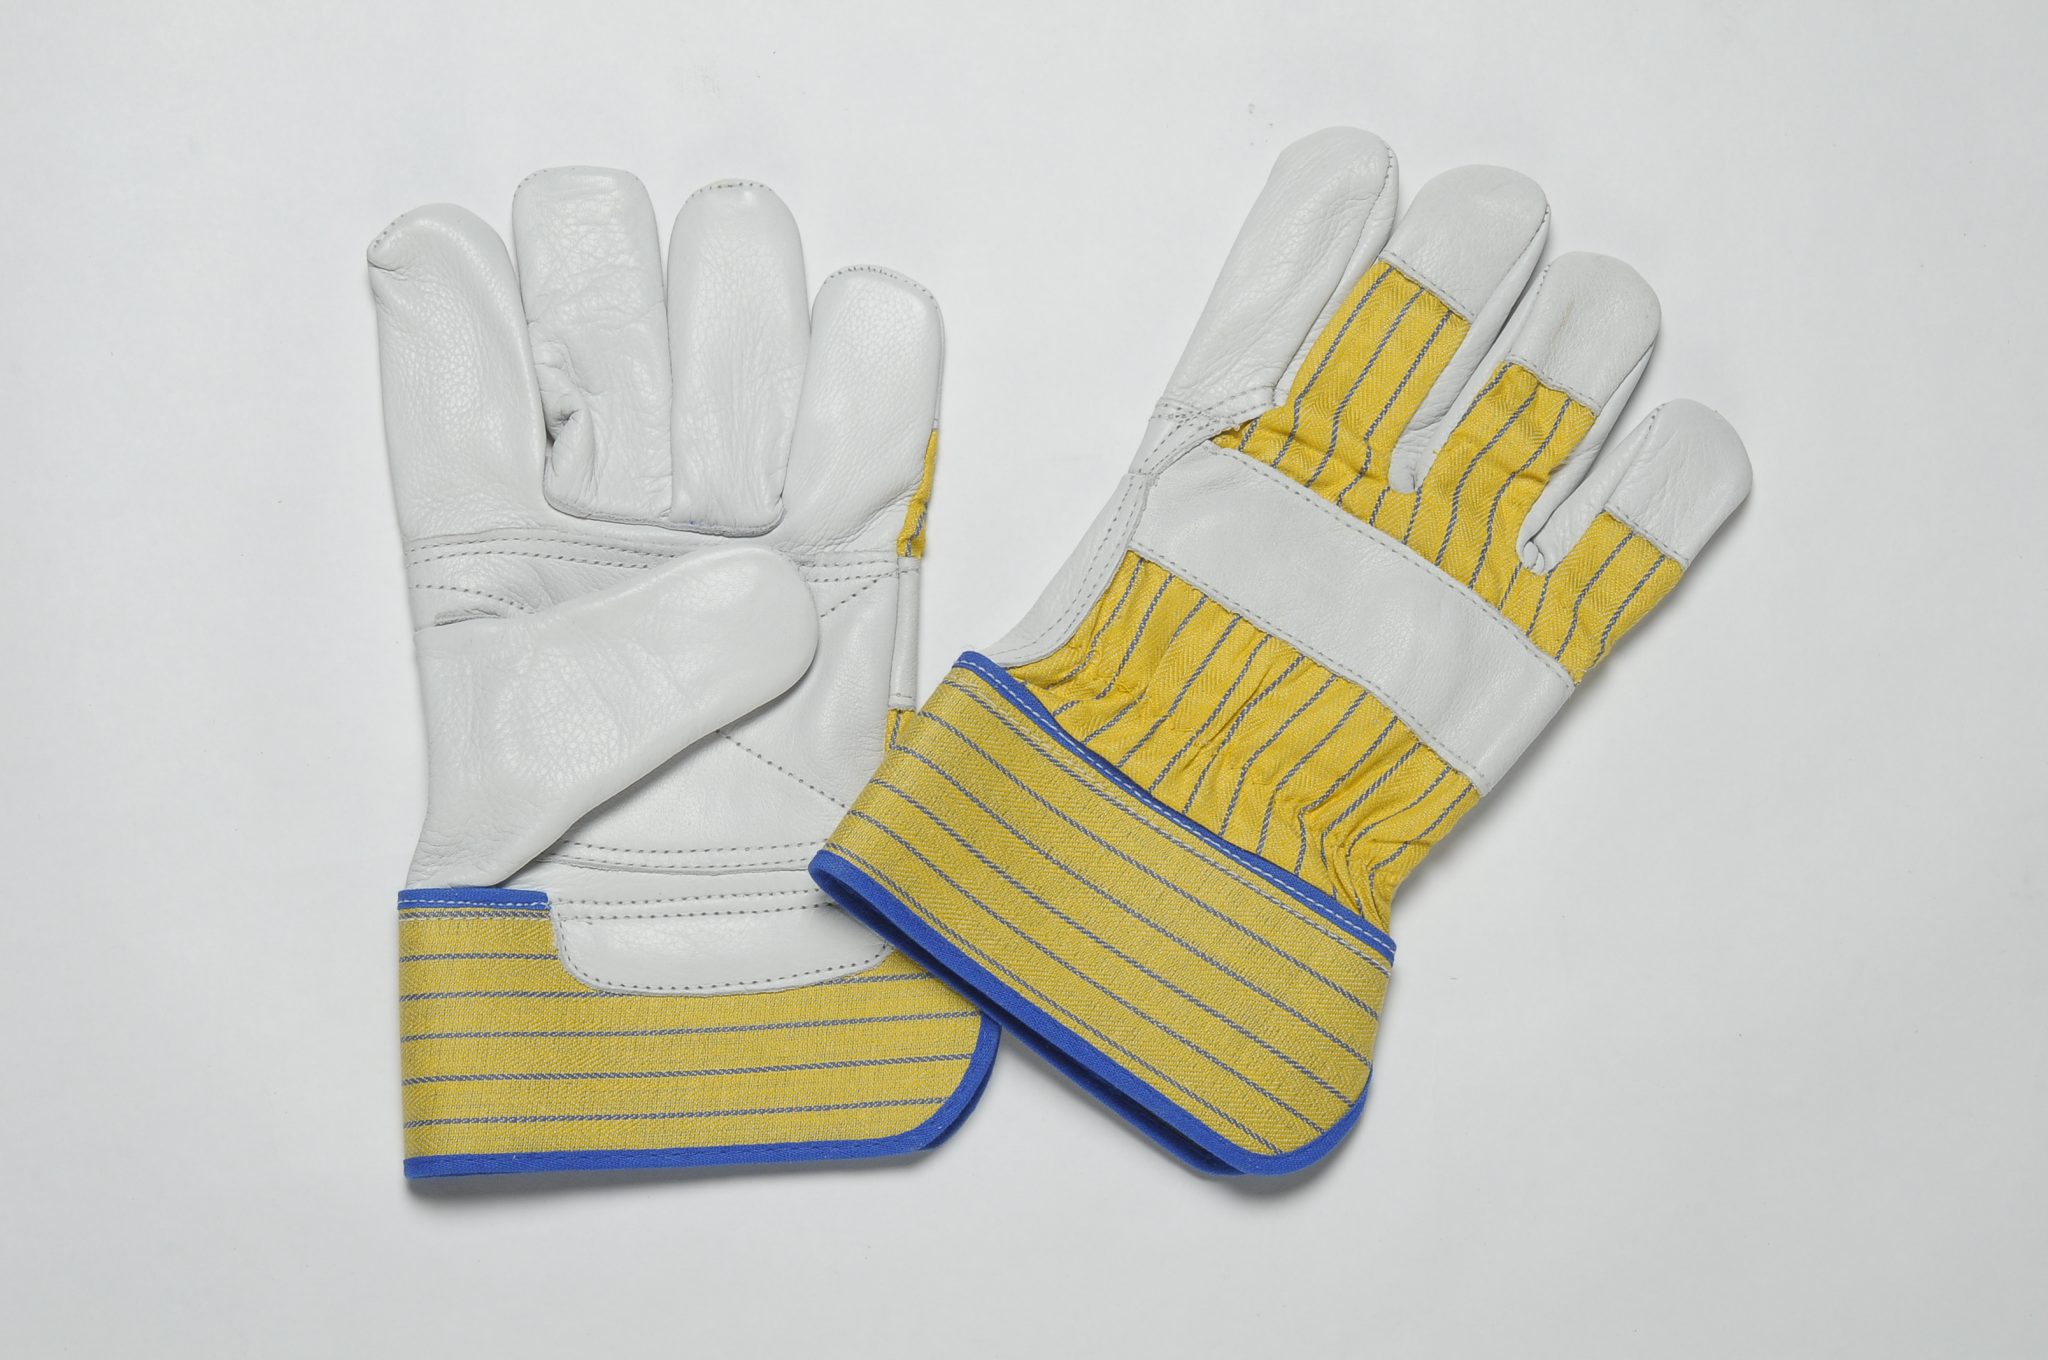 NATURAL GRAIN GLOVES, FLANNEL LINER IN PALM, YELLOW BLUE CUFF & BACK. ADJUSTIBLE ELASTIC IN THE WRIST